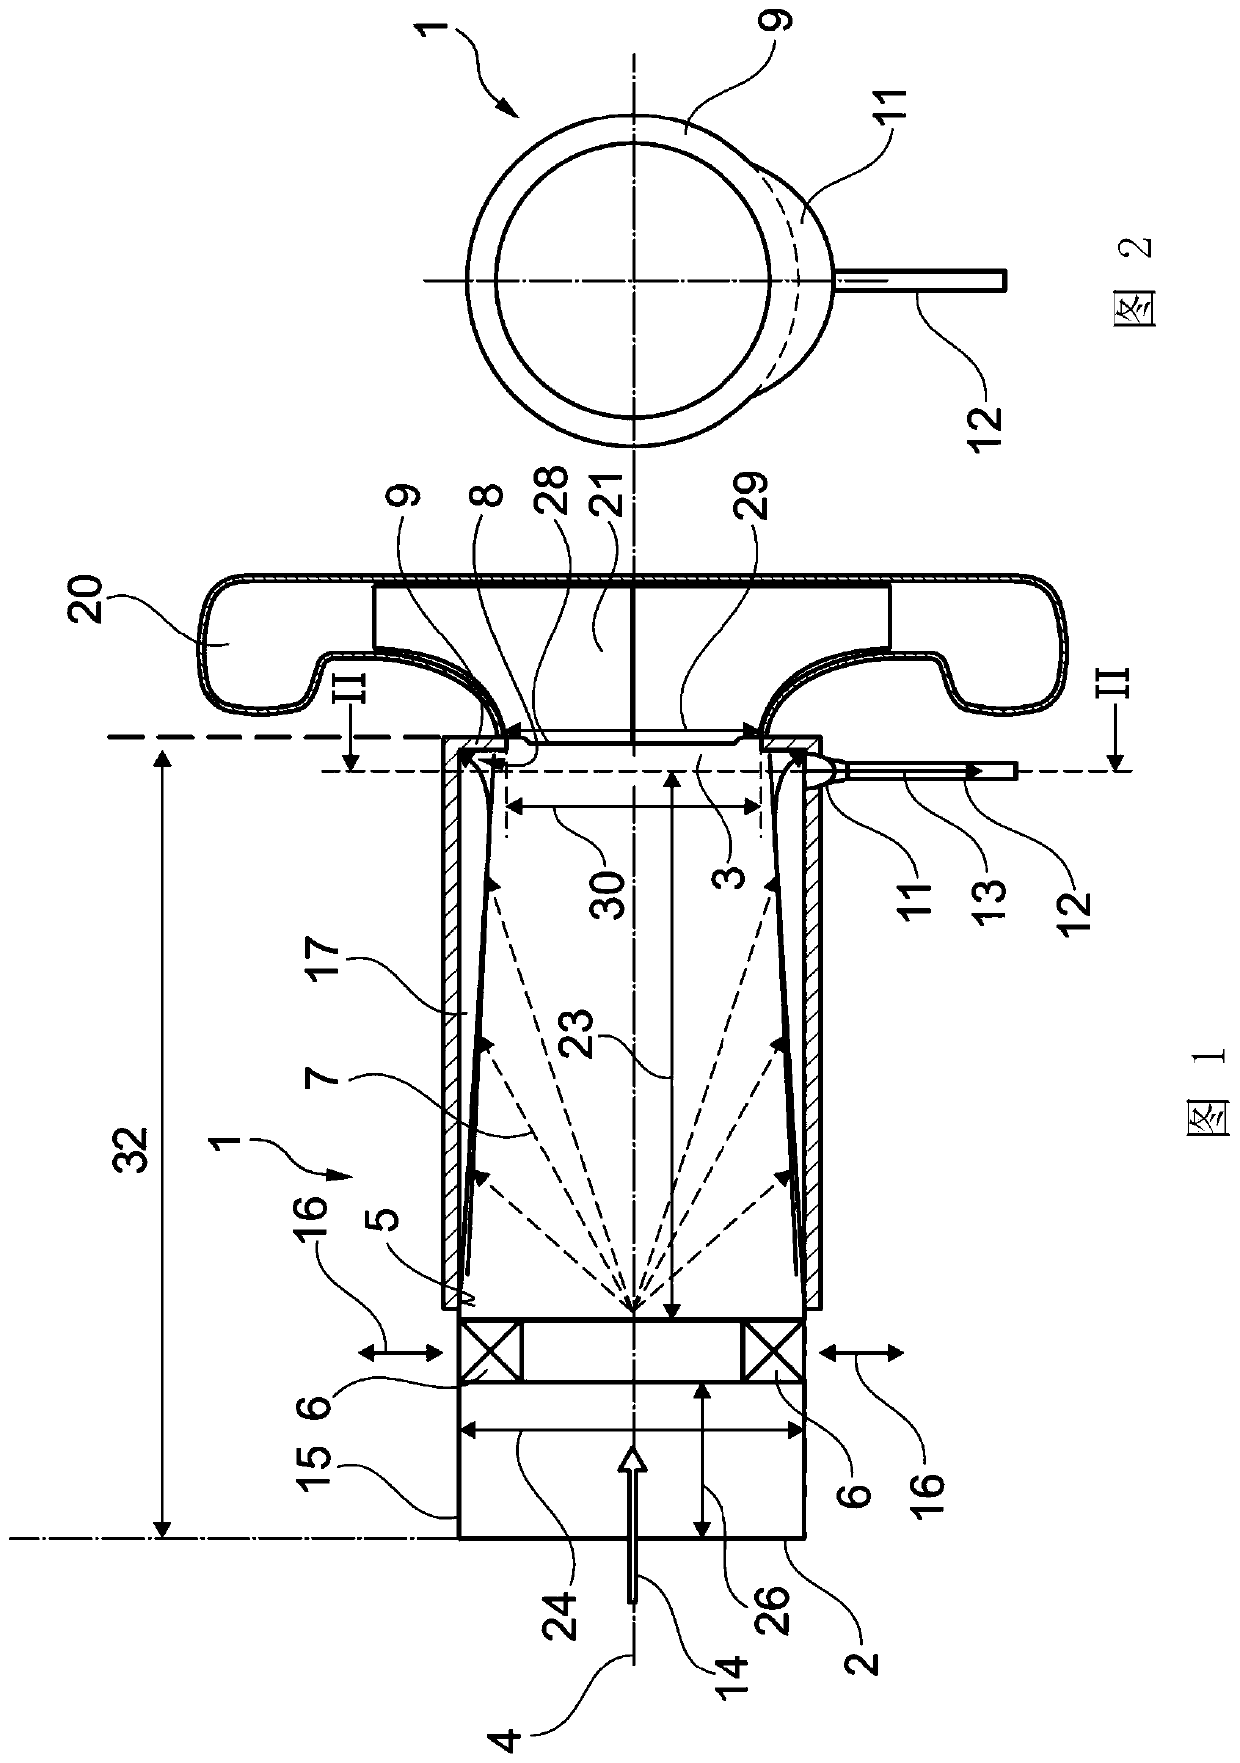 Flow channel for separating and discharging condensate